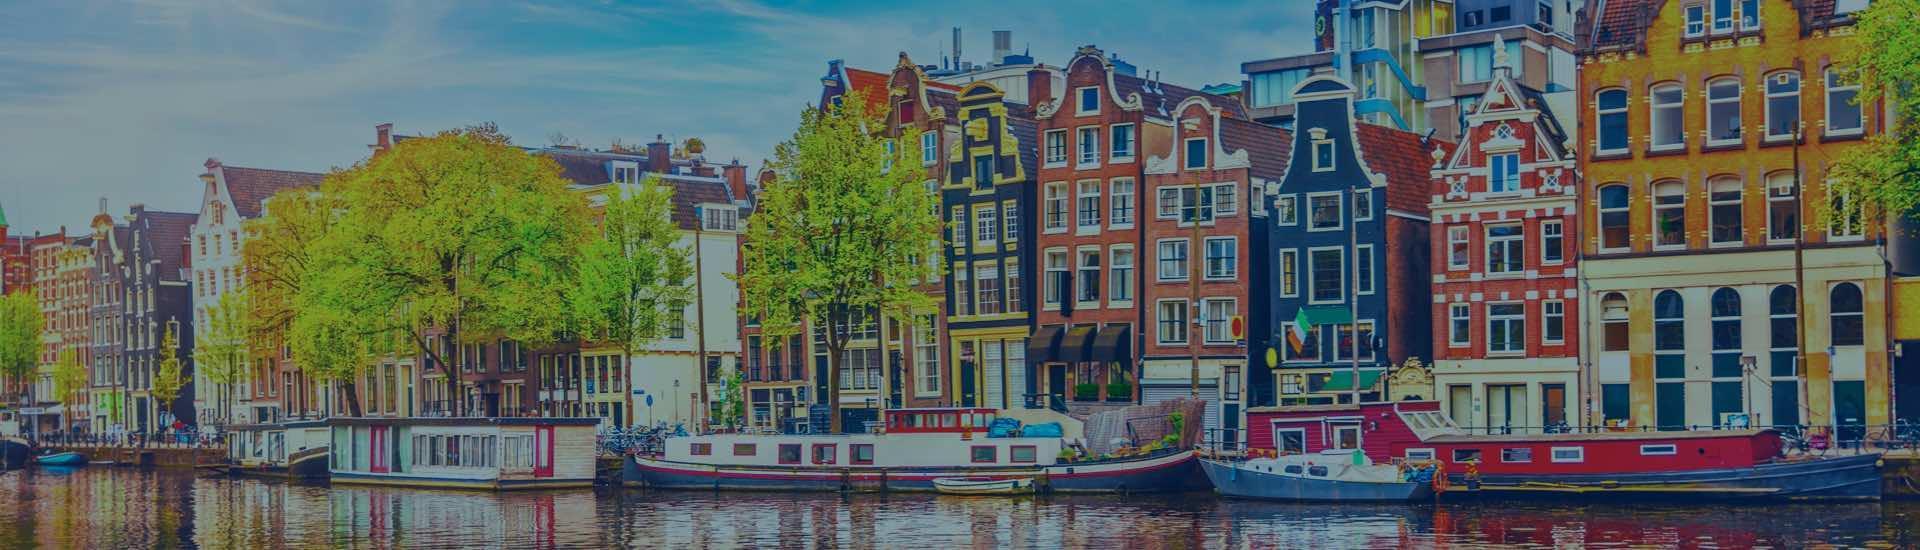 Find the Best HotelsS in Amsterdam